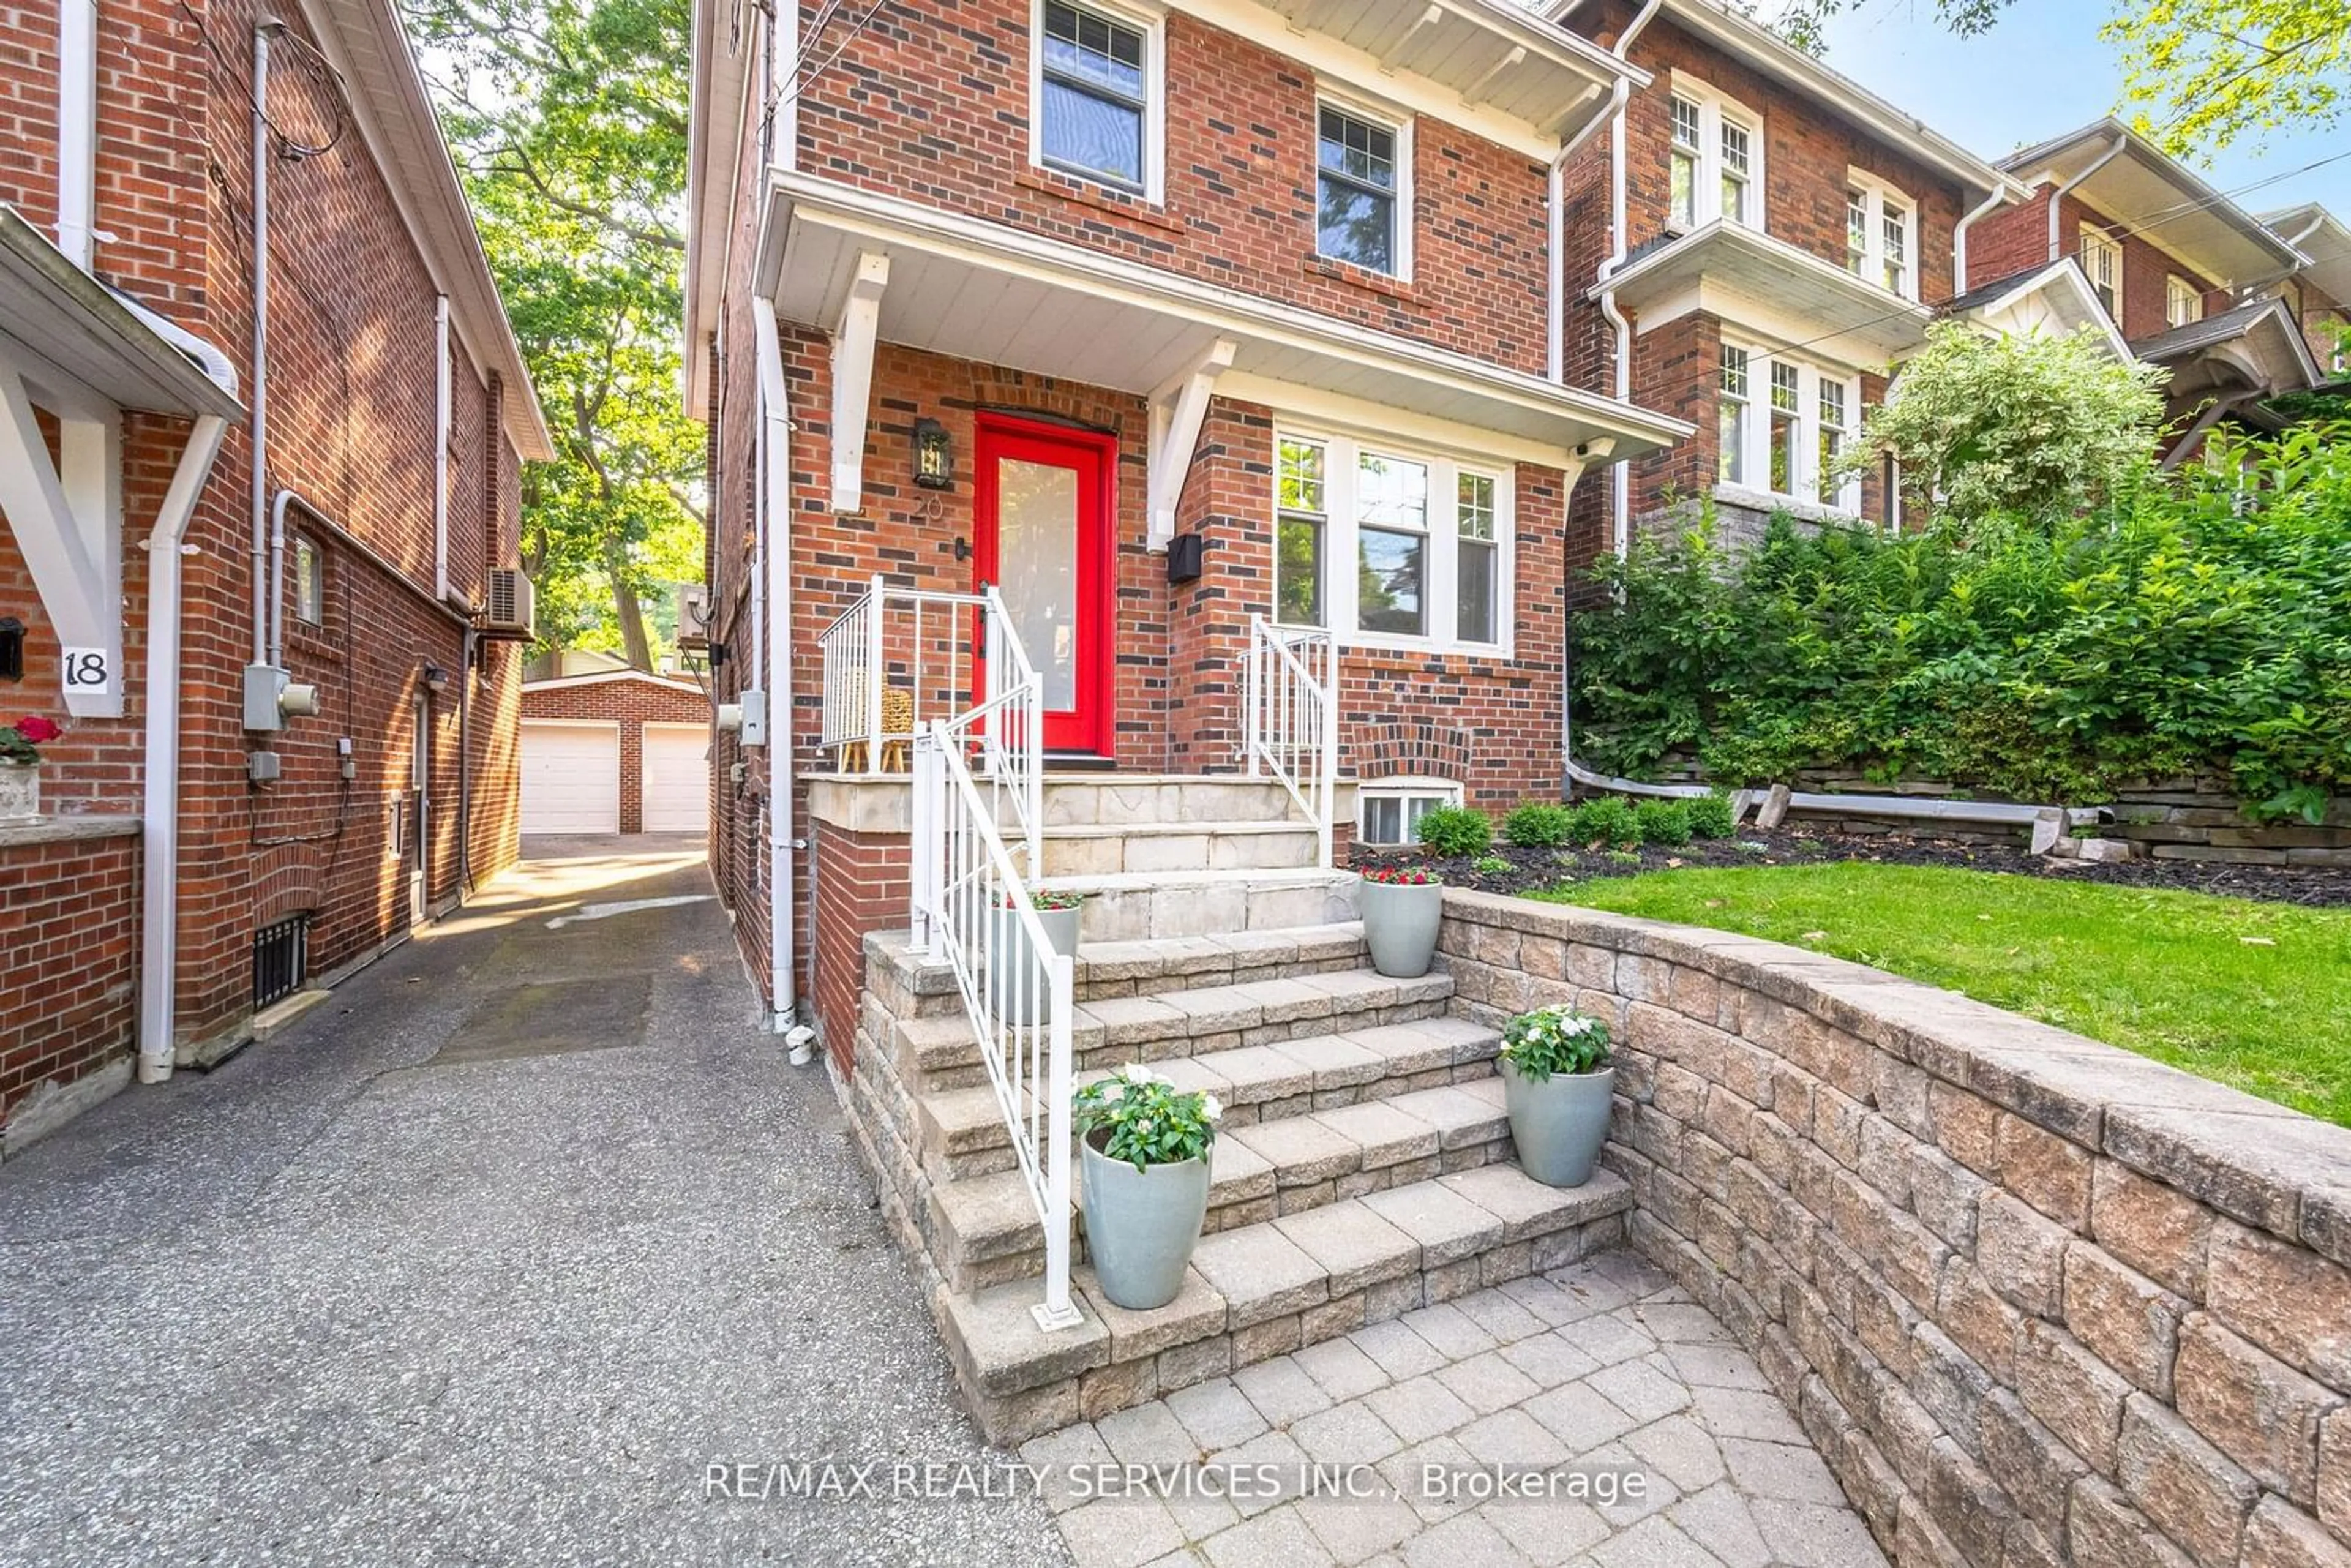 Home with brick exterior material for 20 Courcelette Rd, Toronto Ontario M1N 2S8